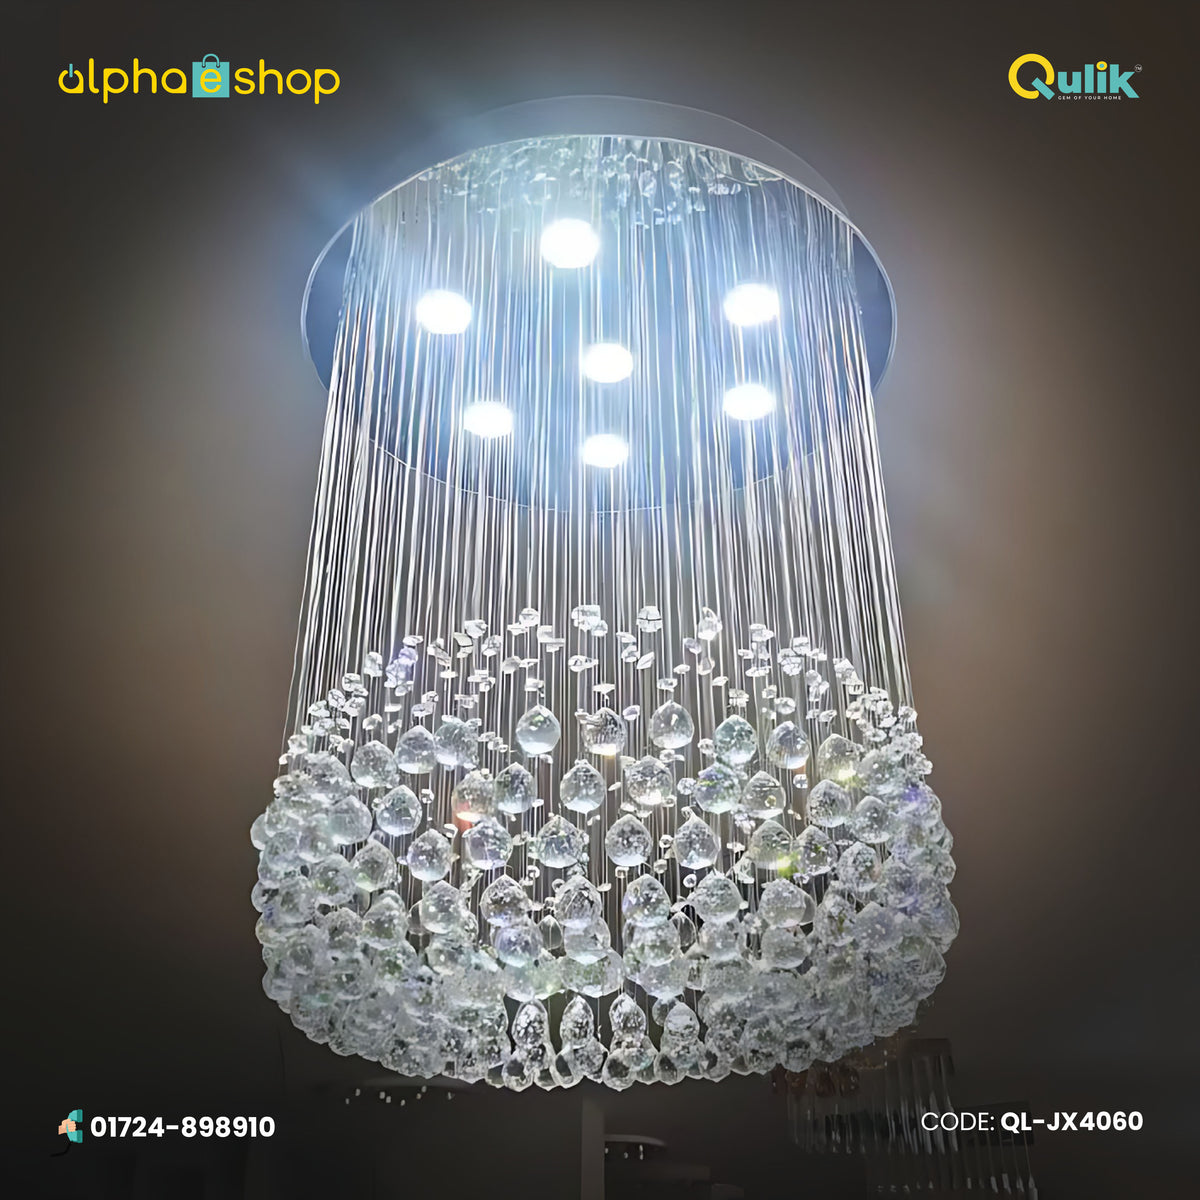 Qulik JX4060 LED Ceiling Light - Contemporary Crystal Chandelier with 30 Glass Balls, Adjustable Color Temperature. Ideal for adding artistic sophistication to living rooms, dining areas, and bedrooms.